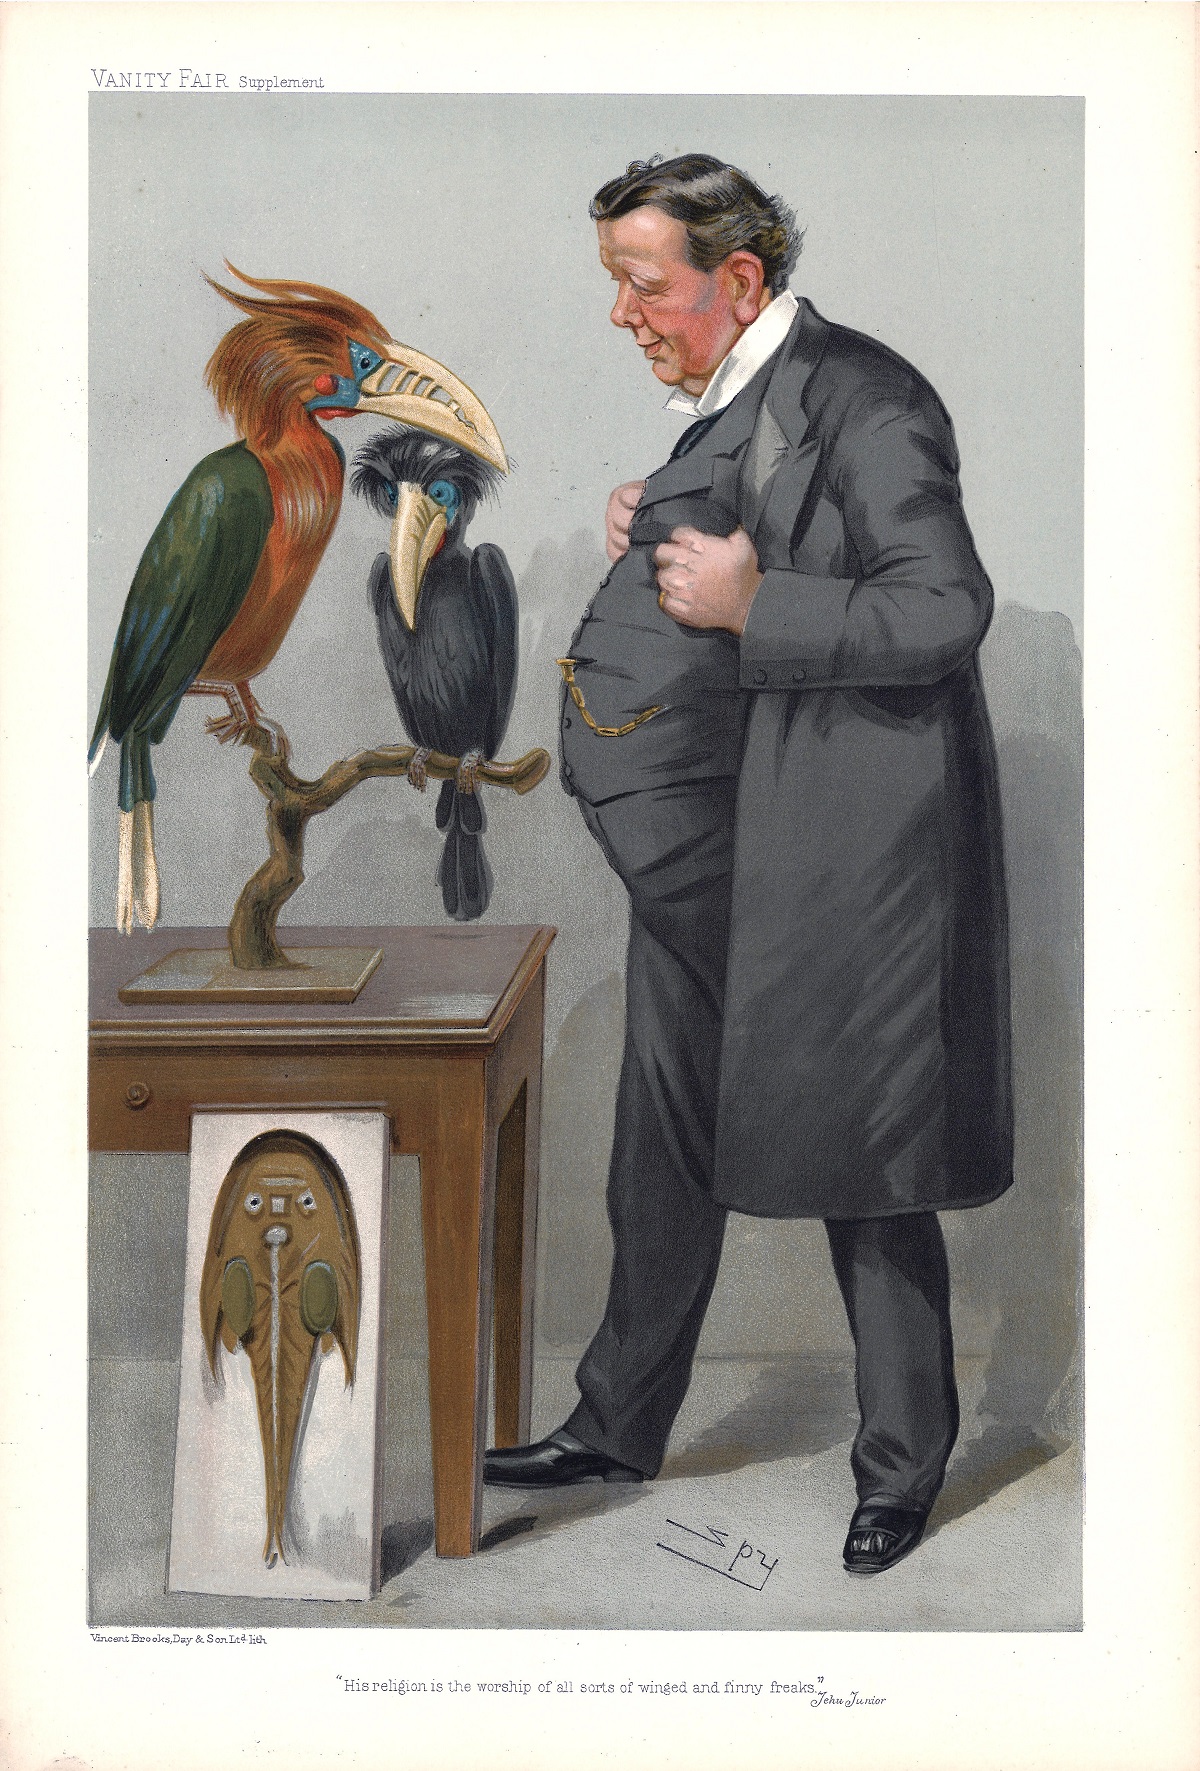 His Religion 12/1/1905 Subject Prof R Lankester , Vanity Fair print, These prints were issued by the